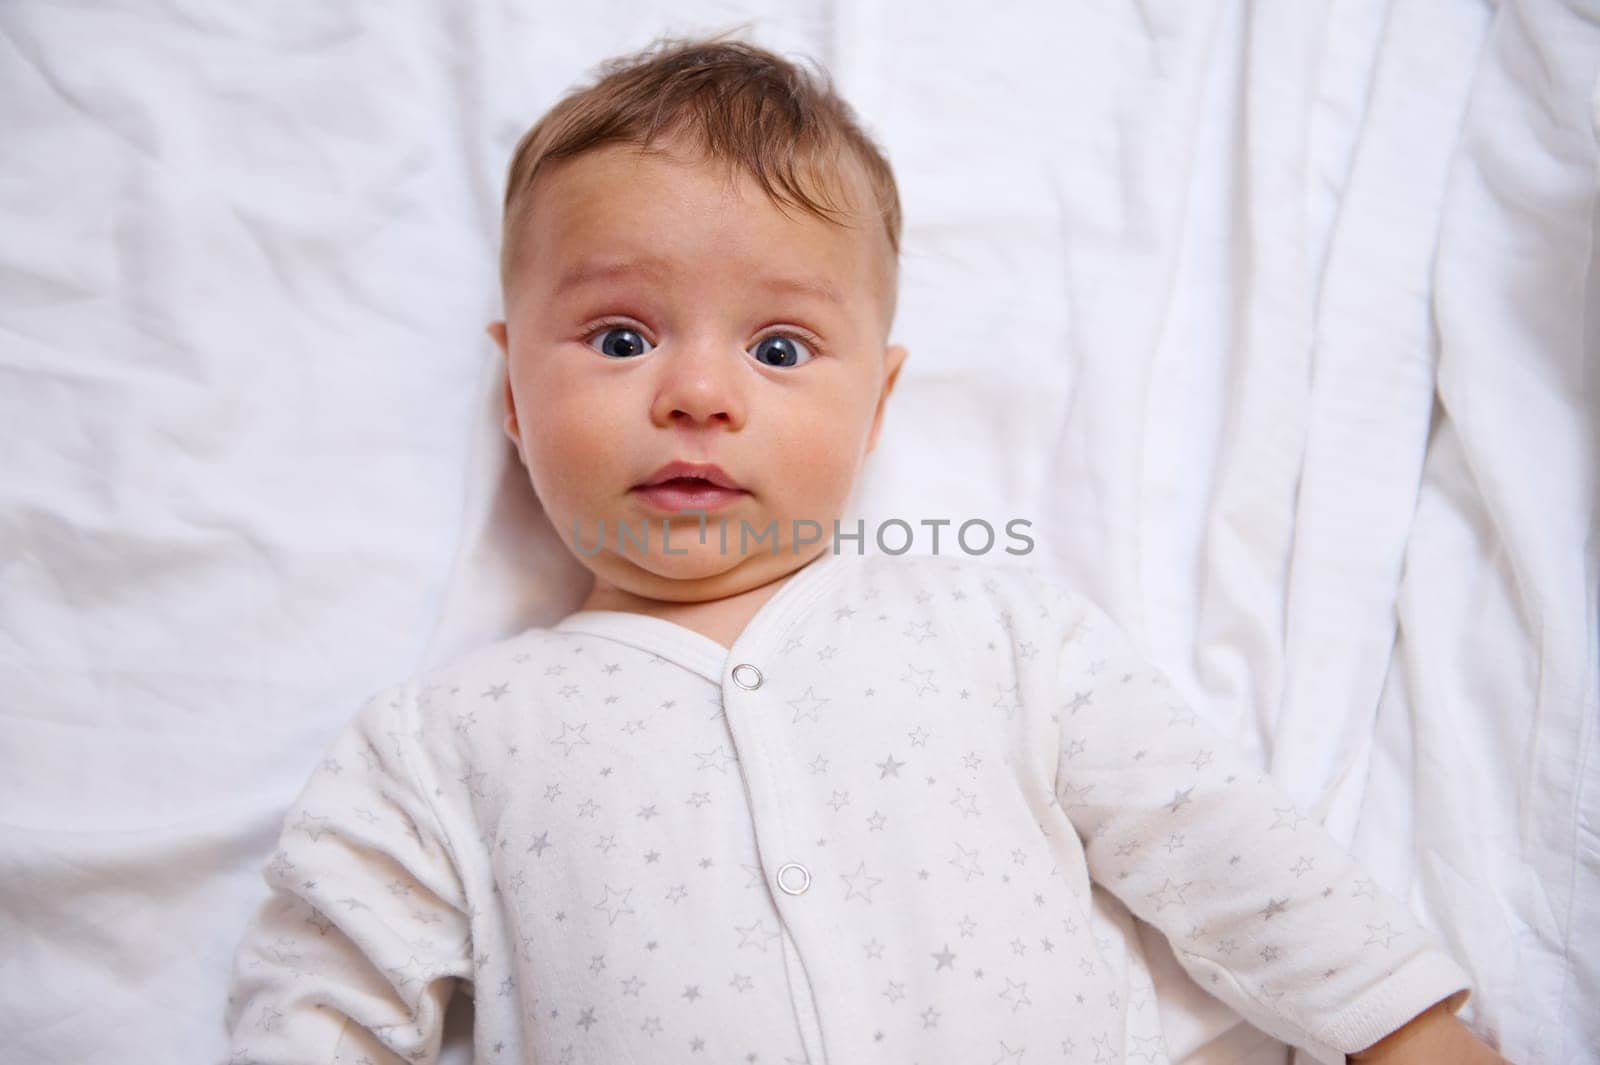 Close-up portrait of cute baby boy 4-6 months old looking at camera, lying on white bed sheets on the bed. Copy ad space by artgf